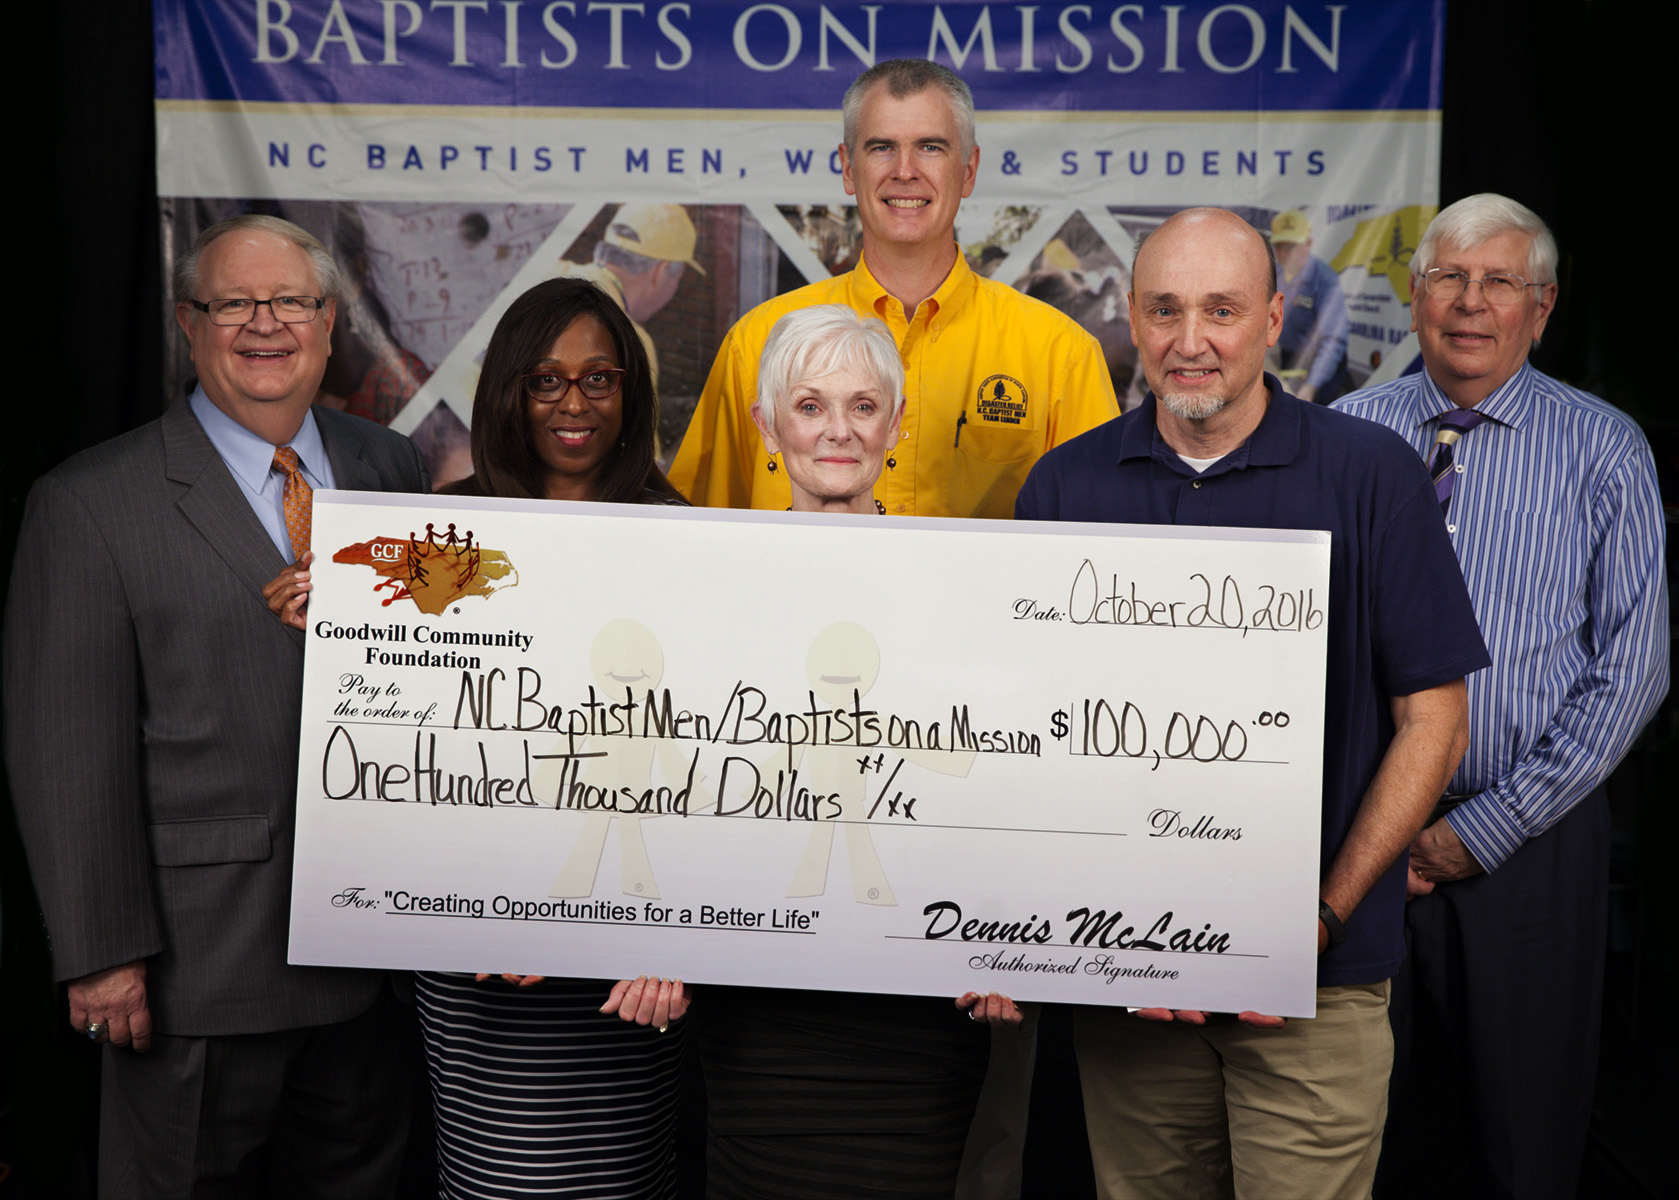 Goodwill Community Foundation presents a check for $100,000 to the N.C. Baptist Men for Hurricane Matthew disaster relief.